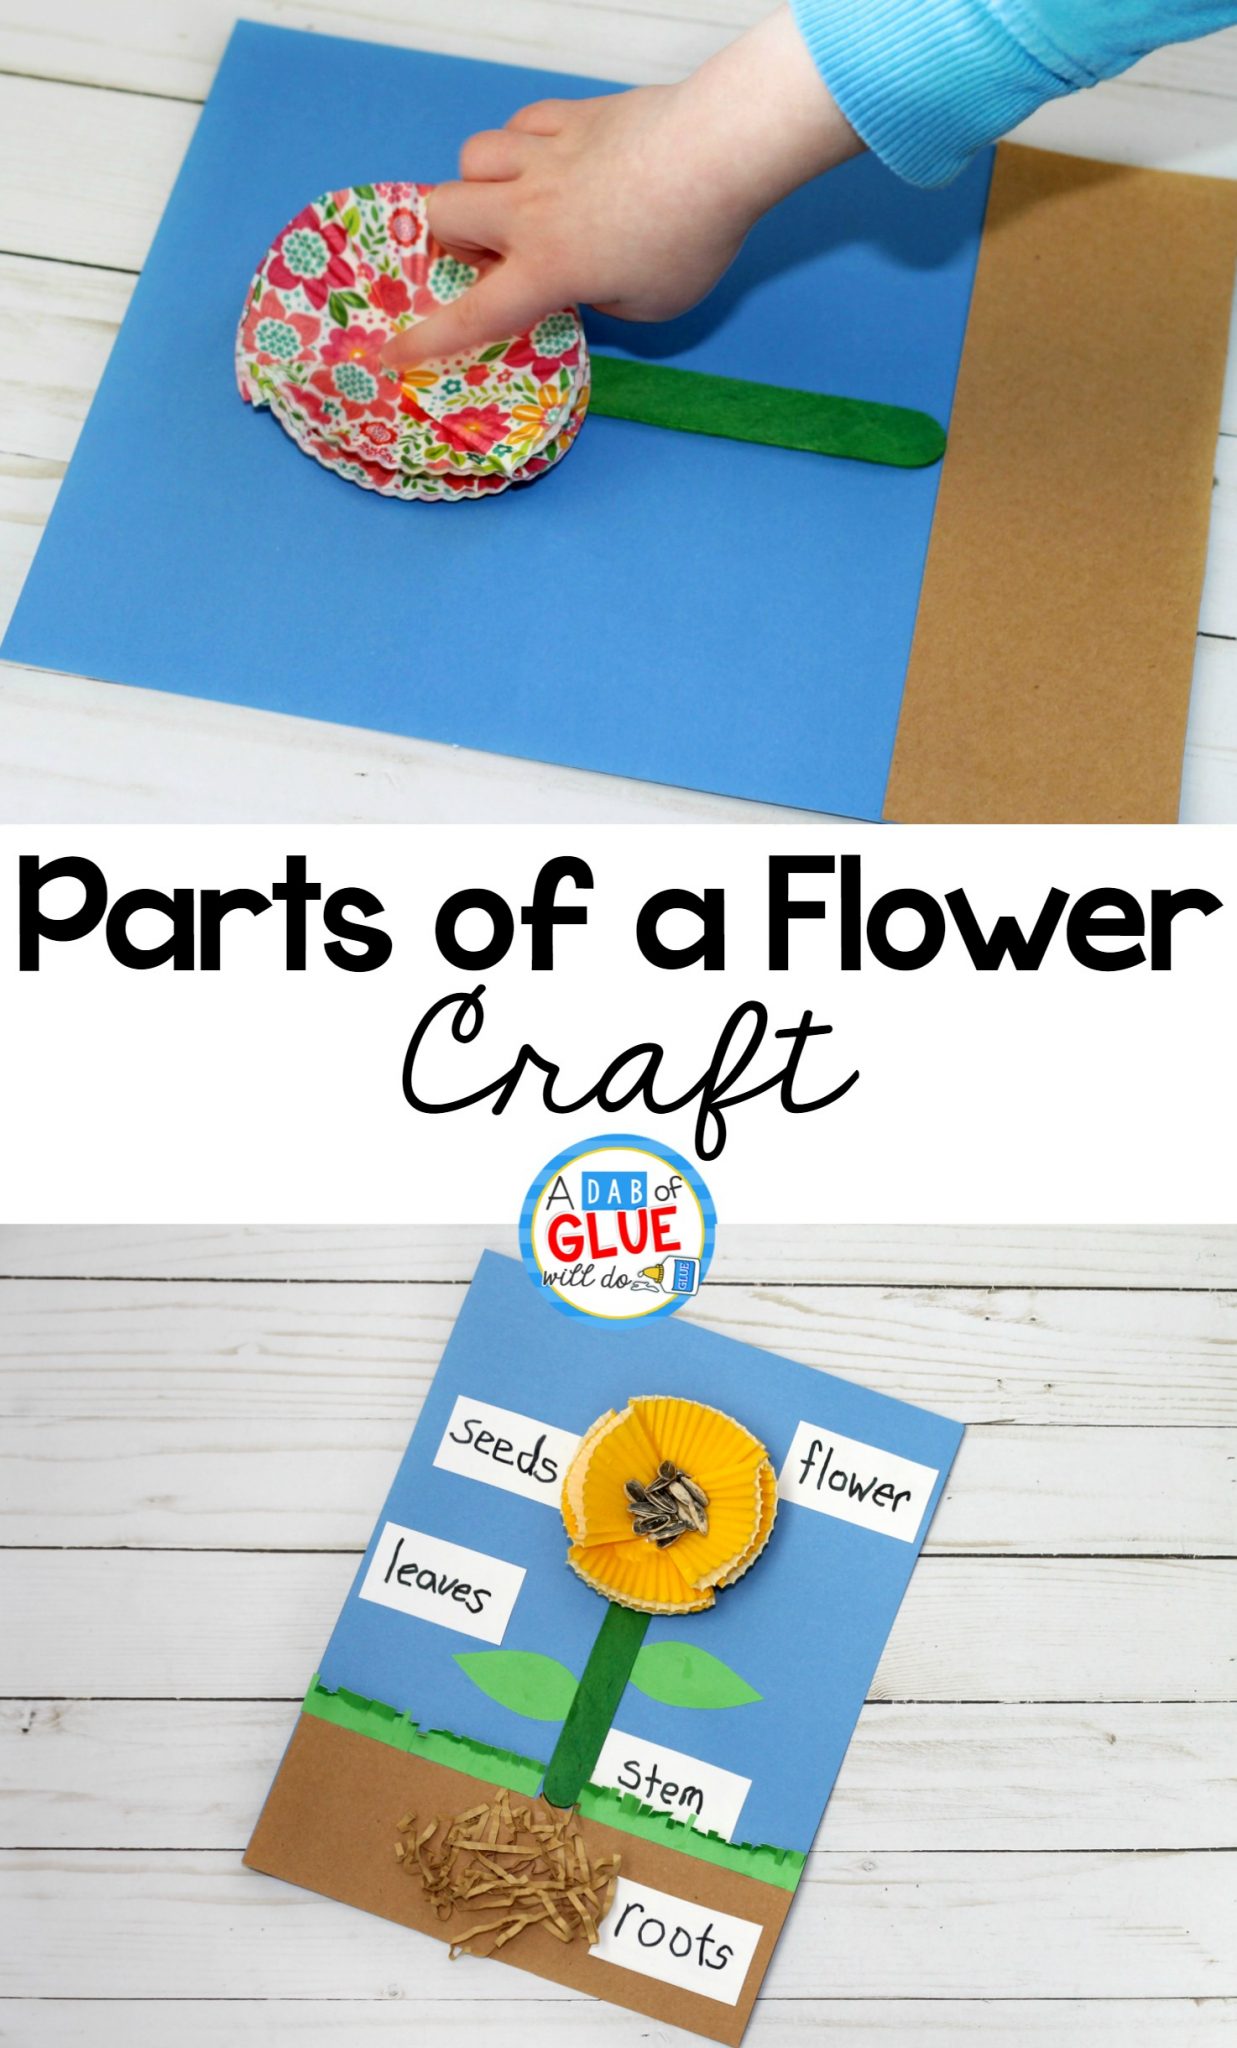 Parts of a Flower Craft, Science Craft, Flower Craft, Parts of a Flower